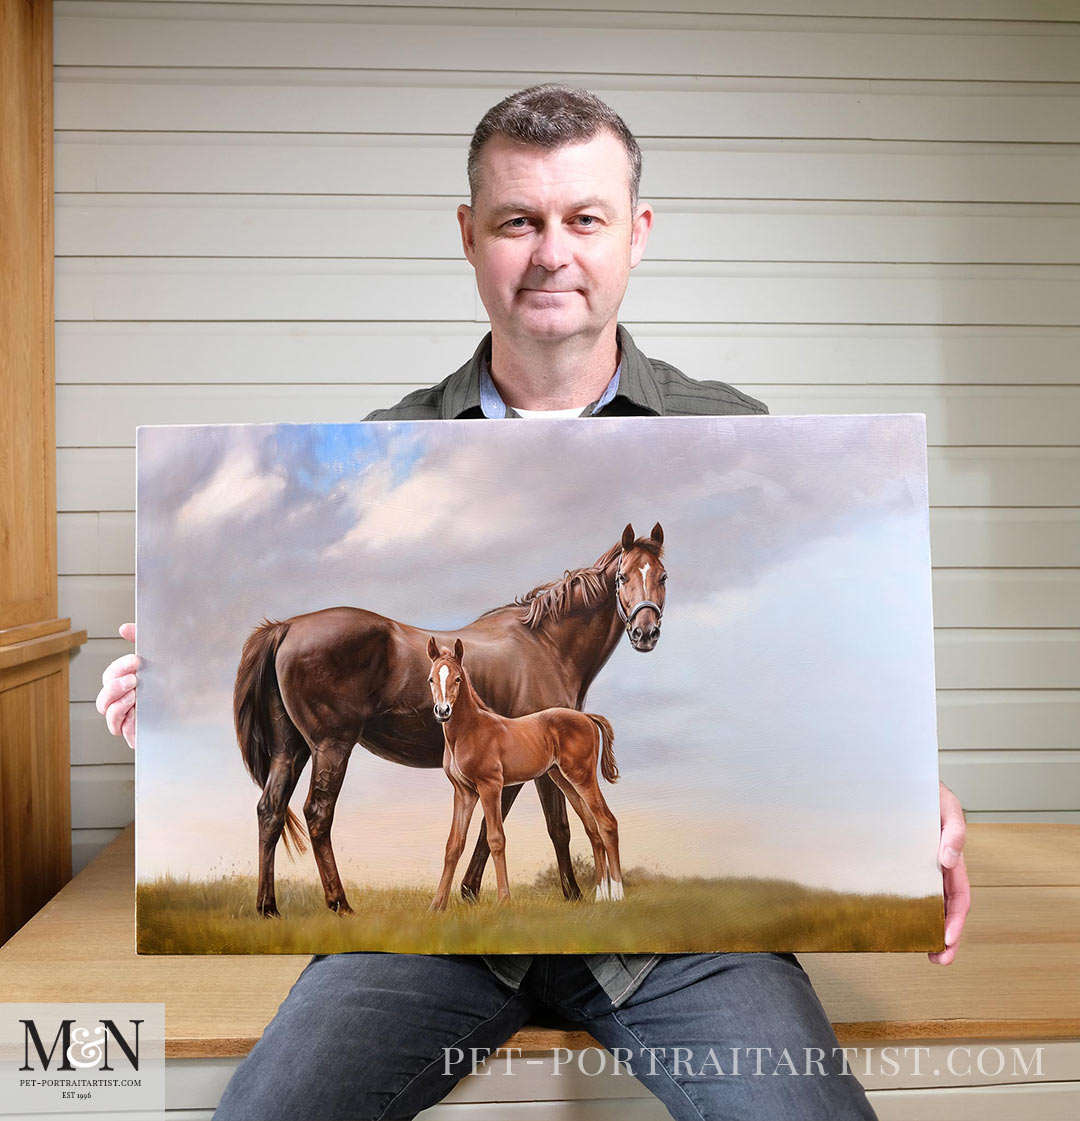 Nicholas with his horse and foal painting